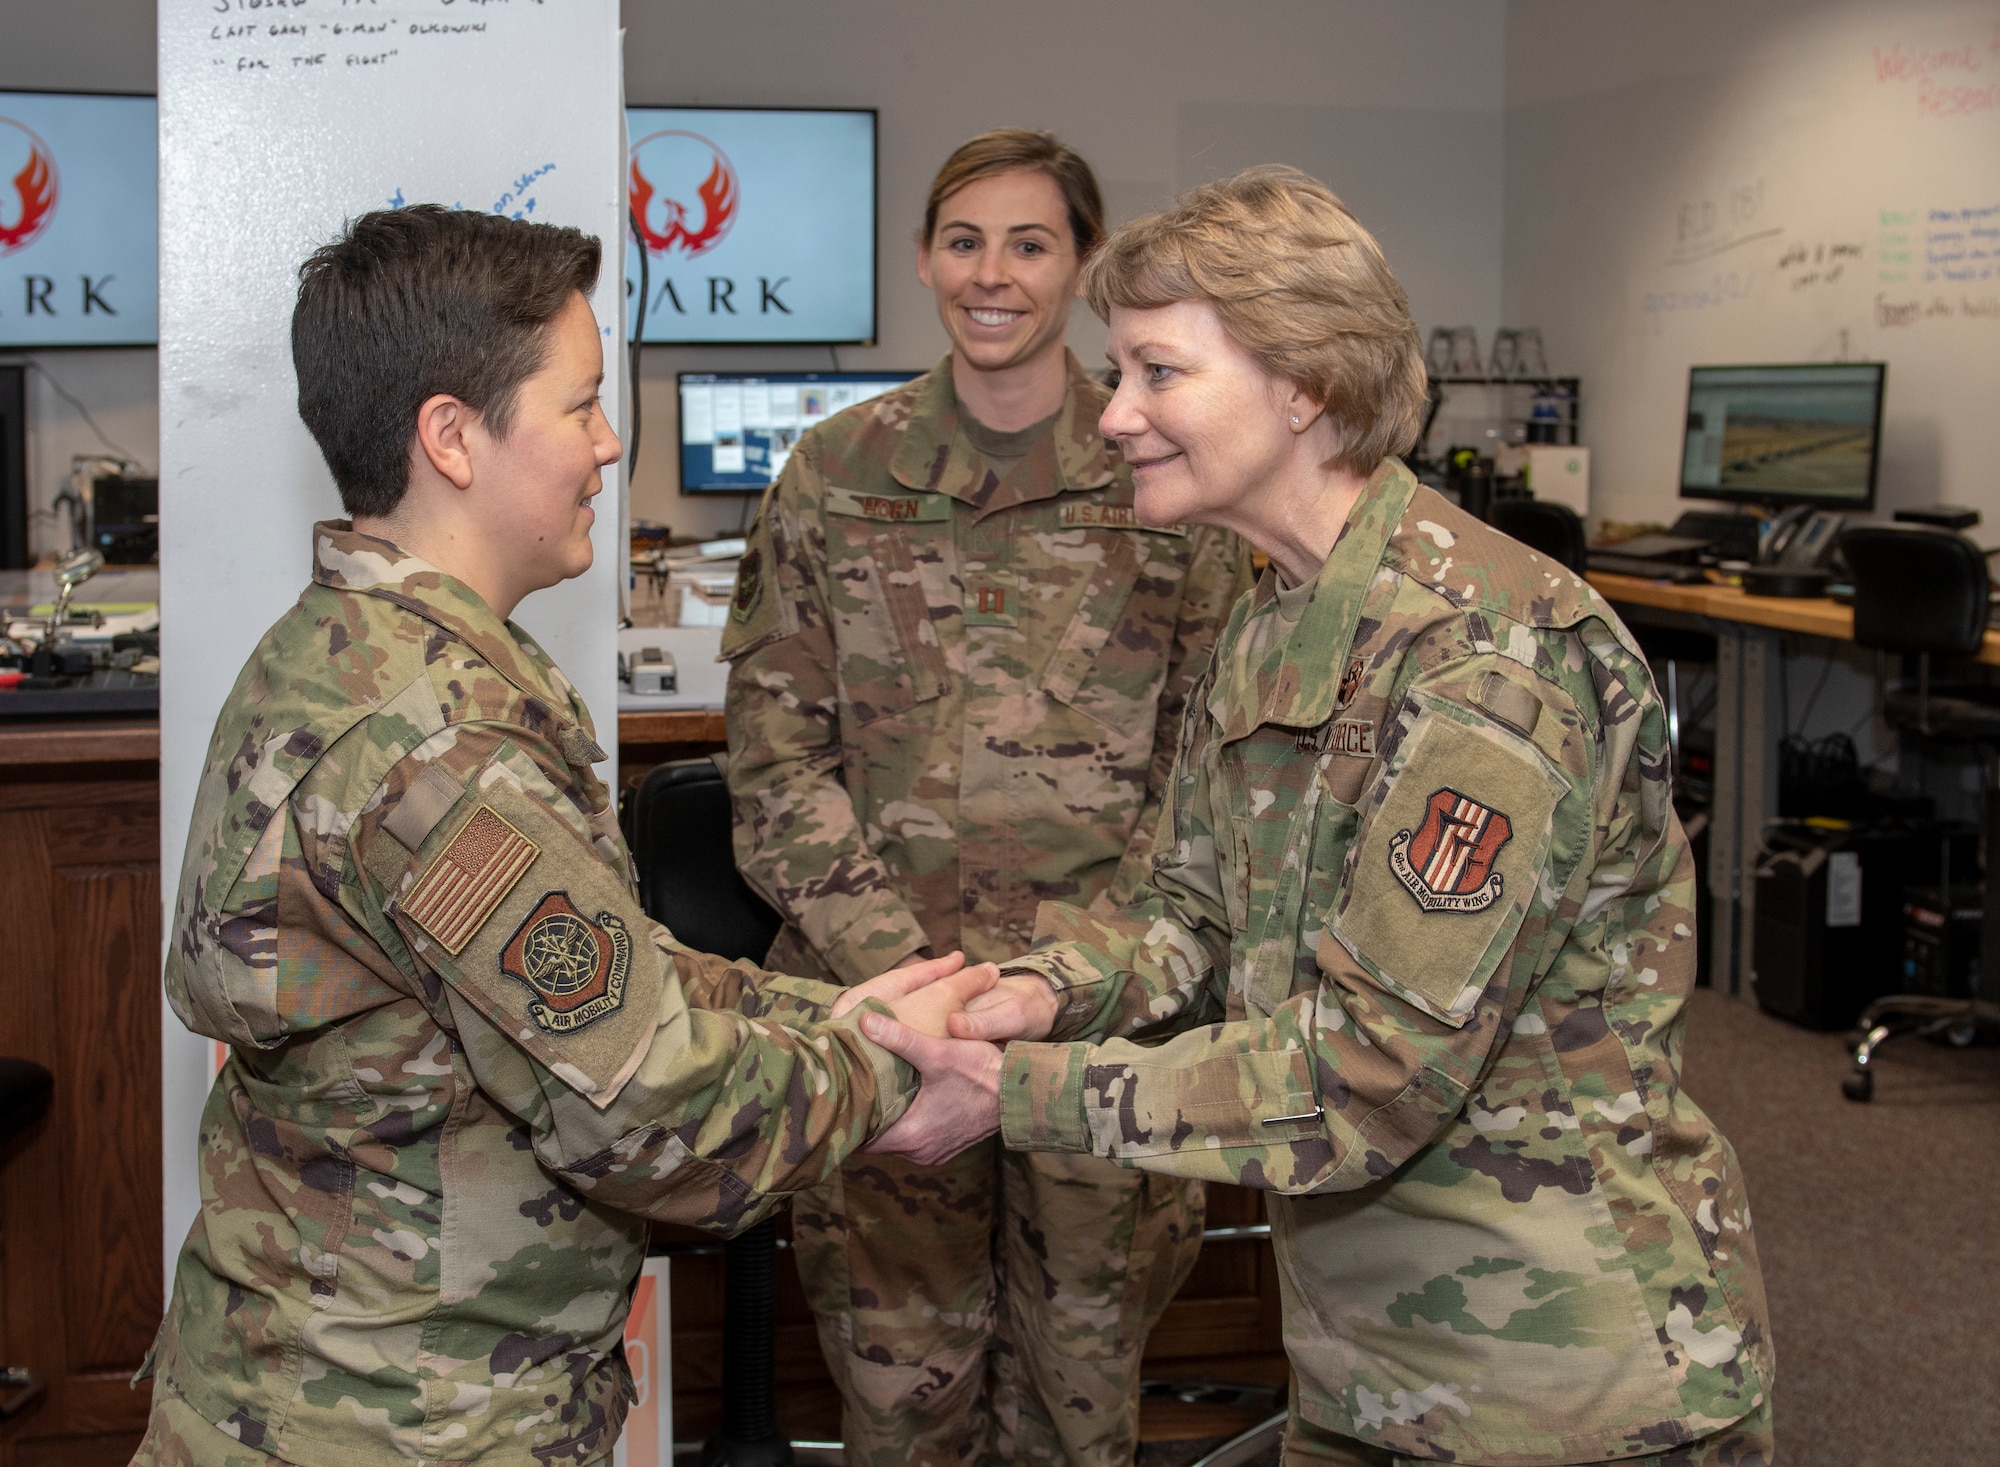 U.S. Air Force Gen. Maryanne Miller, Air Mobility Command commander, right, presents a coin to Staff Sgt. Amber Carter, left, 60 Air Mobility Wing Public Affairs photojournalist, in recognition of her superior performance during a visit to the Phoenix Spark innovation facility at Travis Air Force Base, California, April 16, 2019 as Capt. Lyndsey Horn, PA chief looks on. During the four-day base visit Miller and Chief Master Sgt. Terrence Greene, AMC command chief, met with Airmen across Travis to see how the base enhances AMC’s global mobility capabilities. (U.S. Air Force photo by Heide Couch)